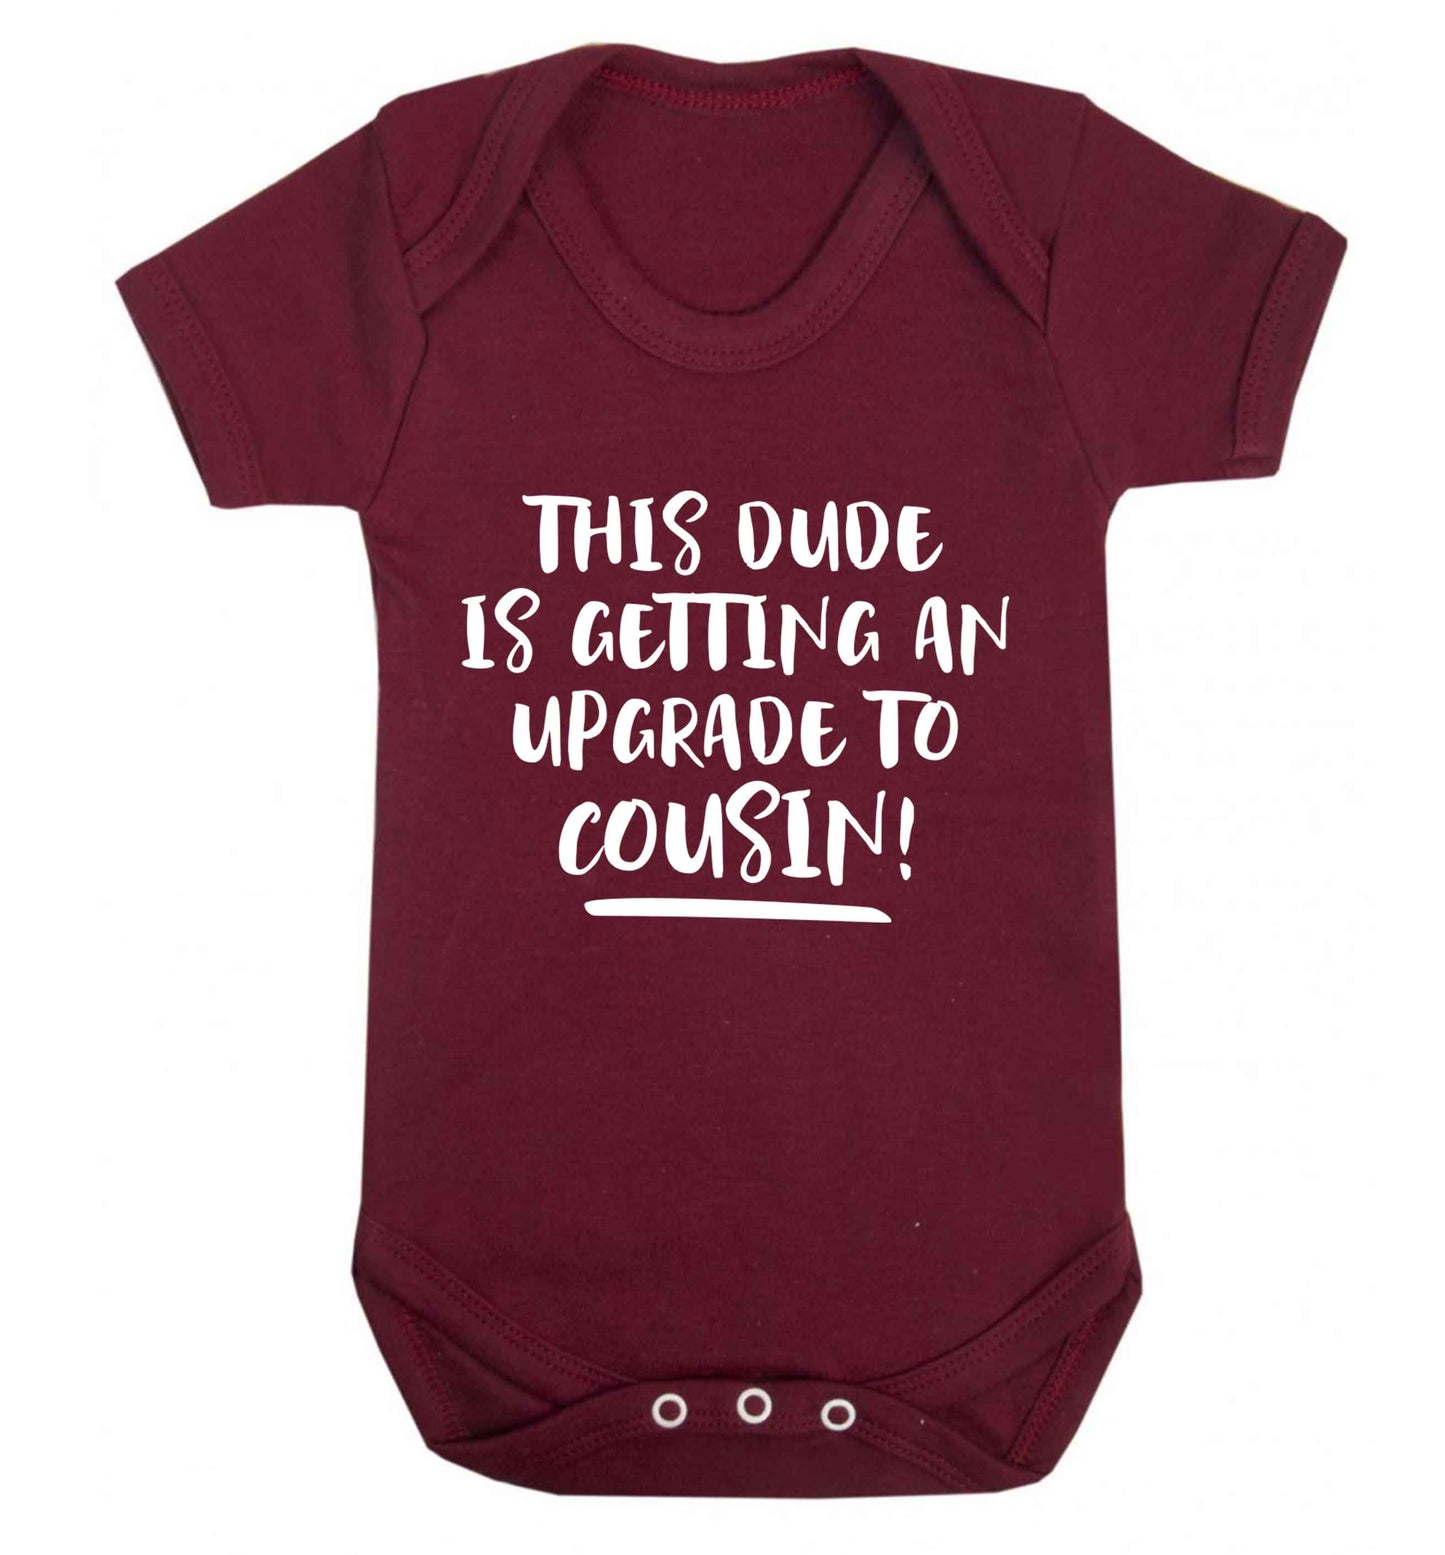 This dude is getting an upgrade to cousin! Baby Vest maroon 18-24 months